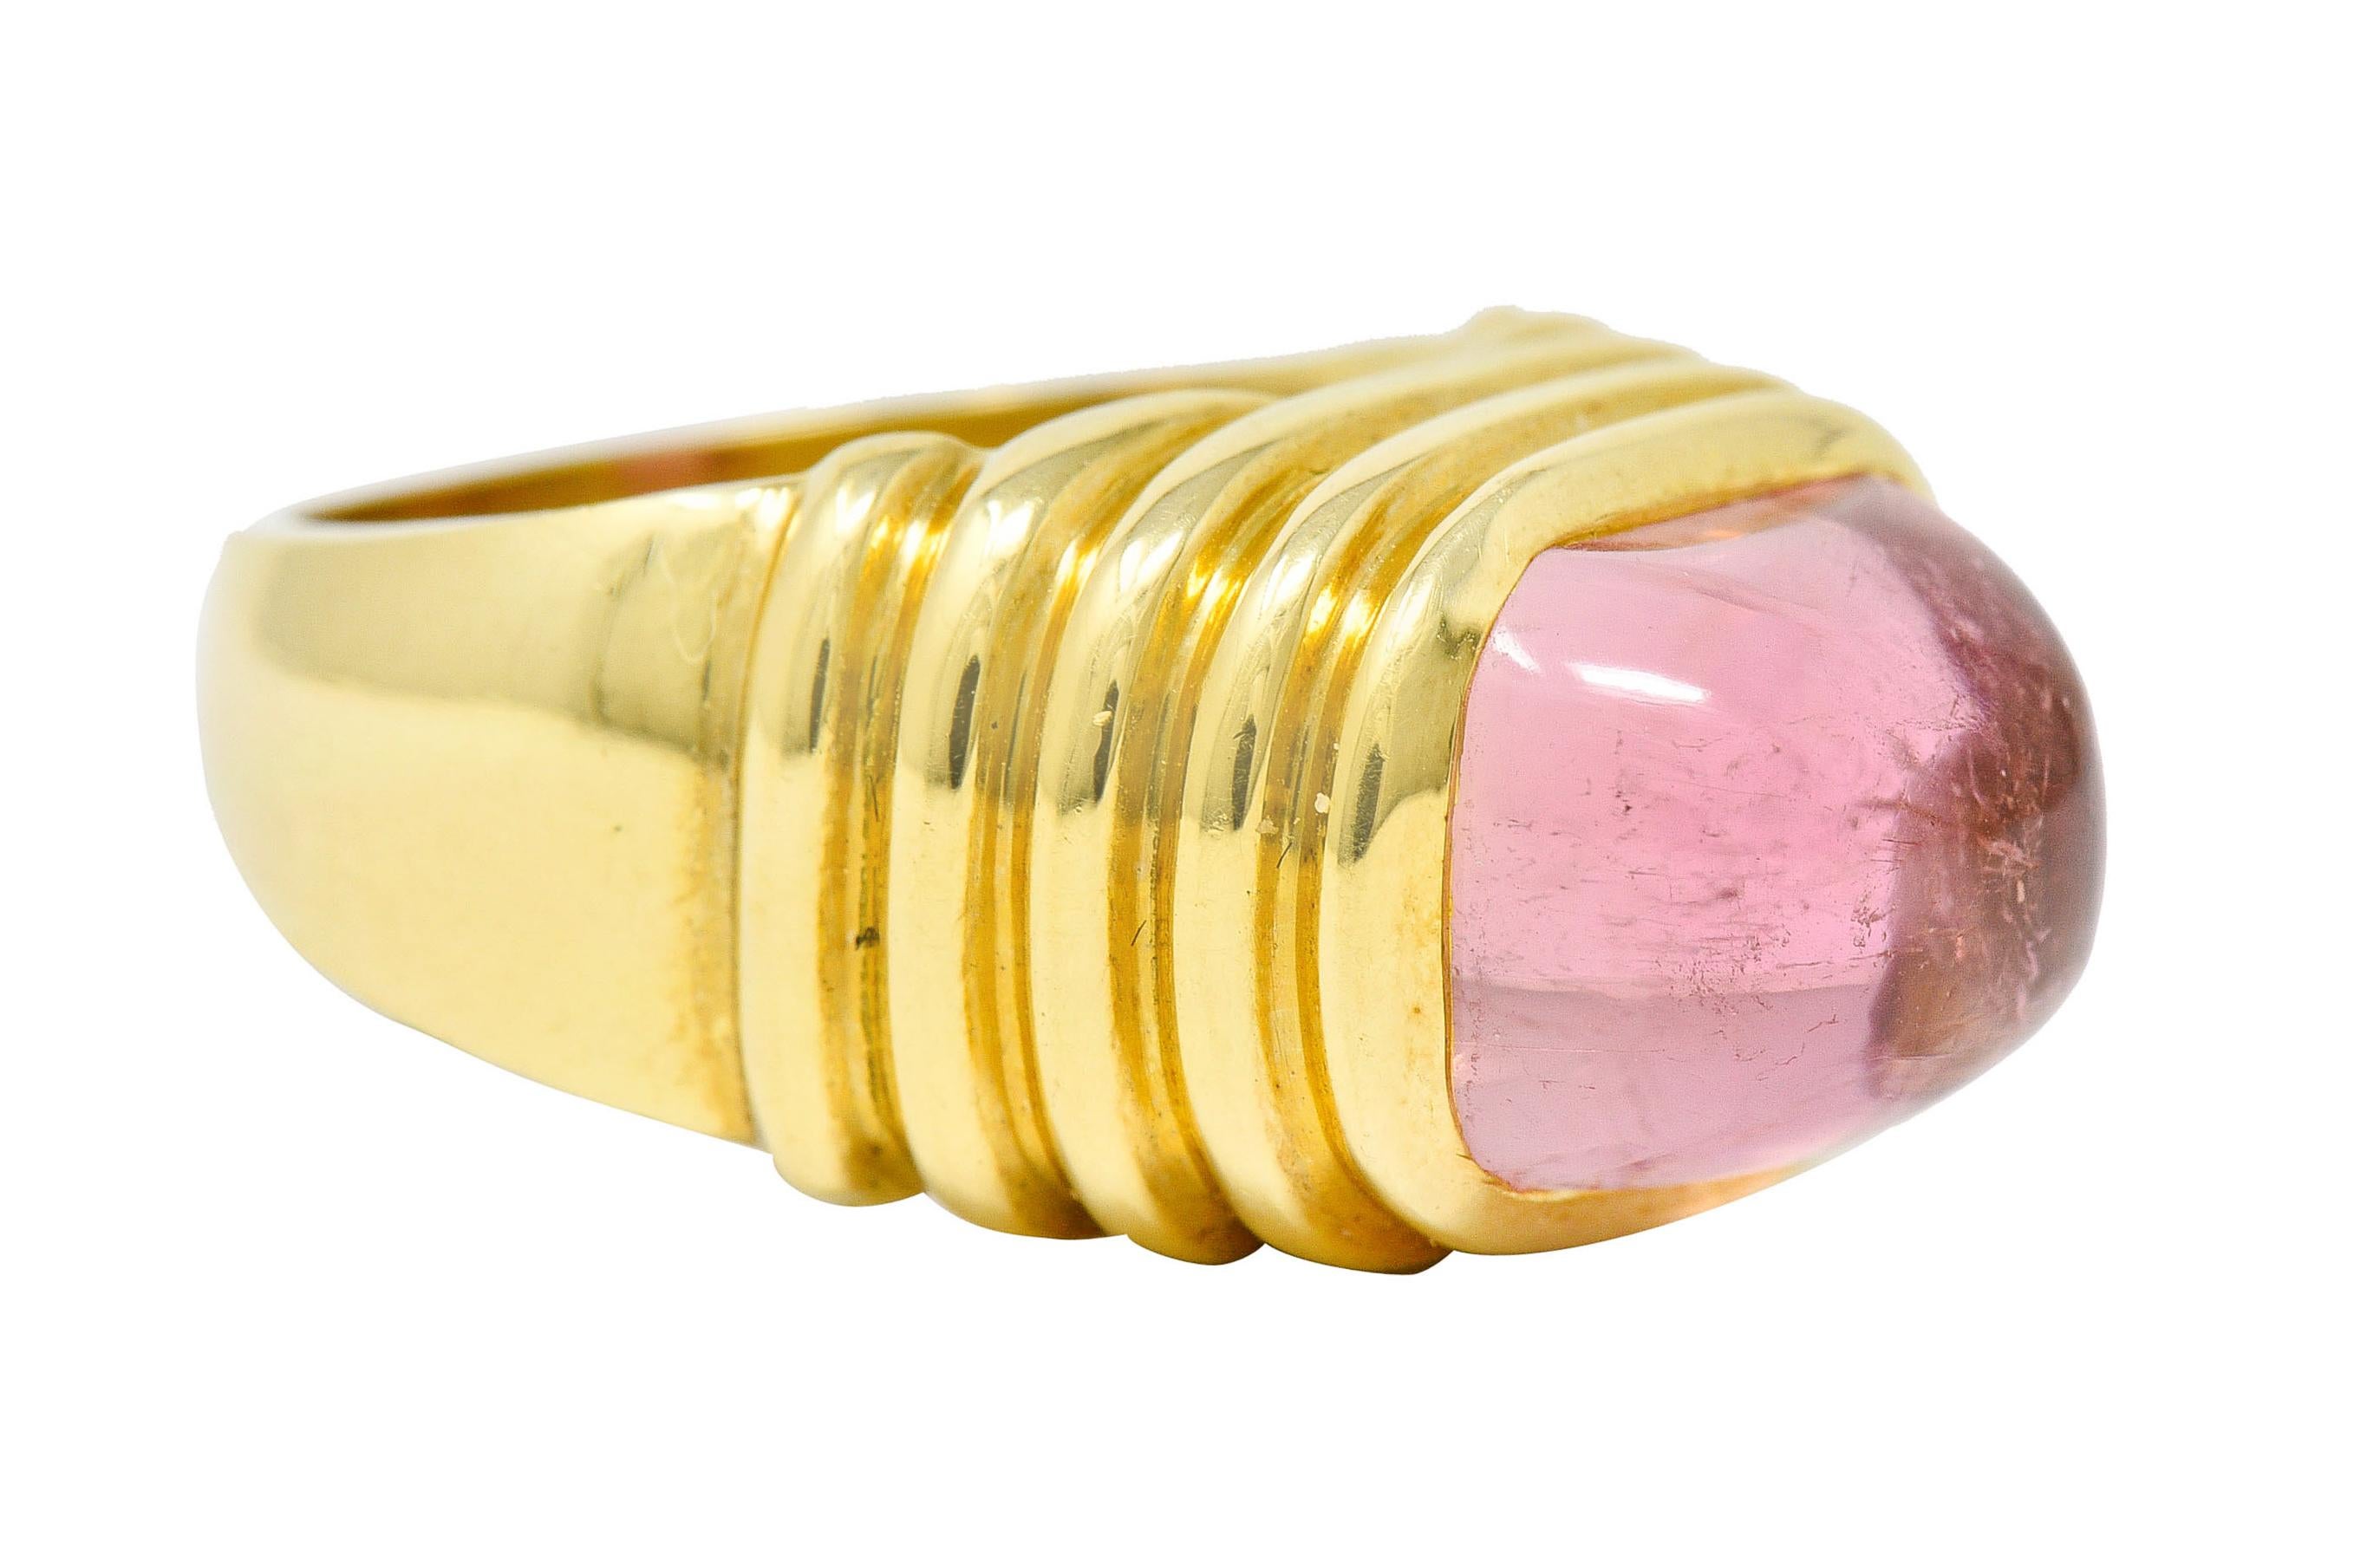 Centering a cushion cut cabochon of tourmaline measuring approximately 11.8 x 8.8 mm

Medium light pink and semi-transparent with natural inclusions

Bezel set in a multi-tiered and ribbed gold surround

Tested as 18 karat gold

Circa: 2000s

Ring